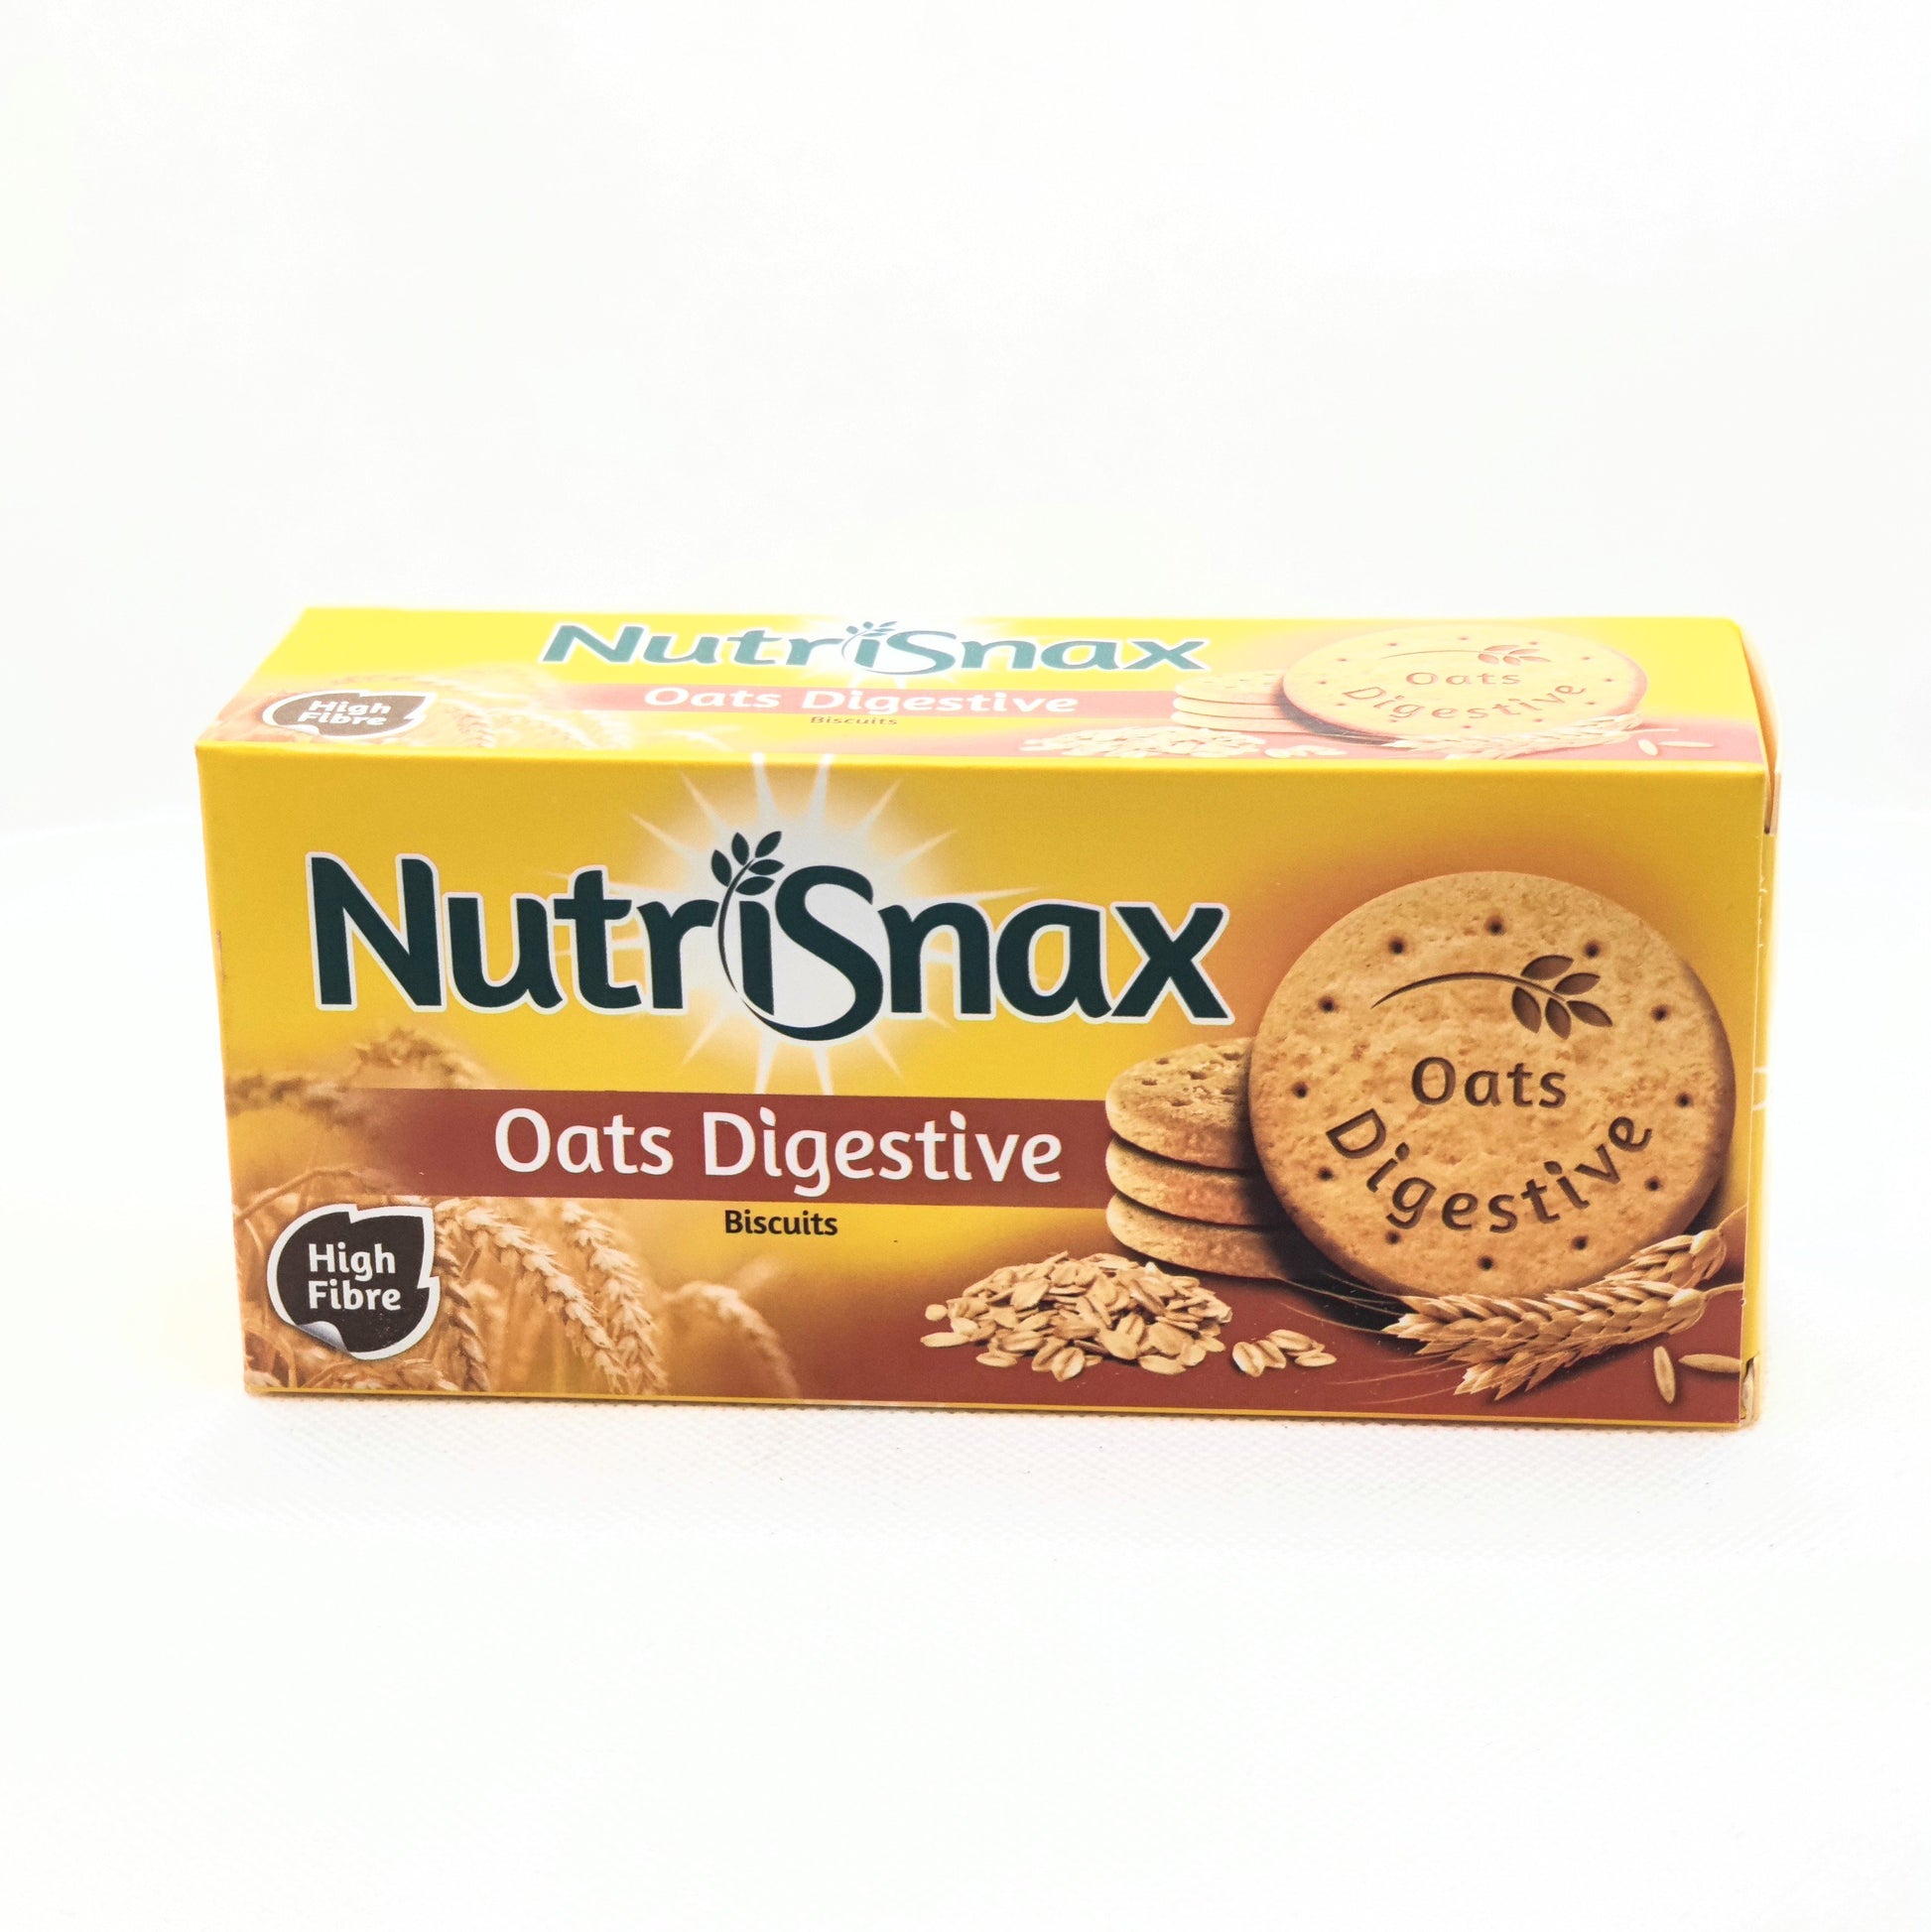 105 gram box of nutrisnax oats digestive biscuits